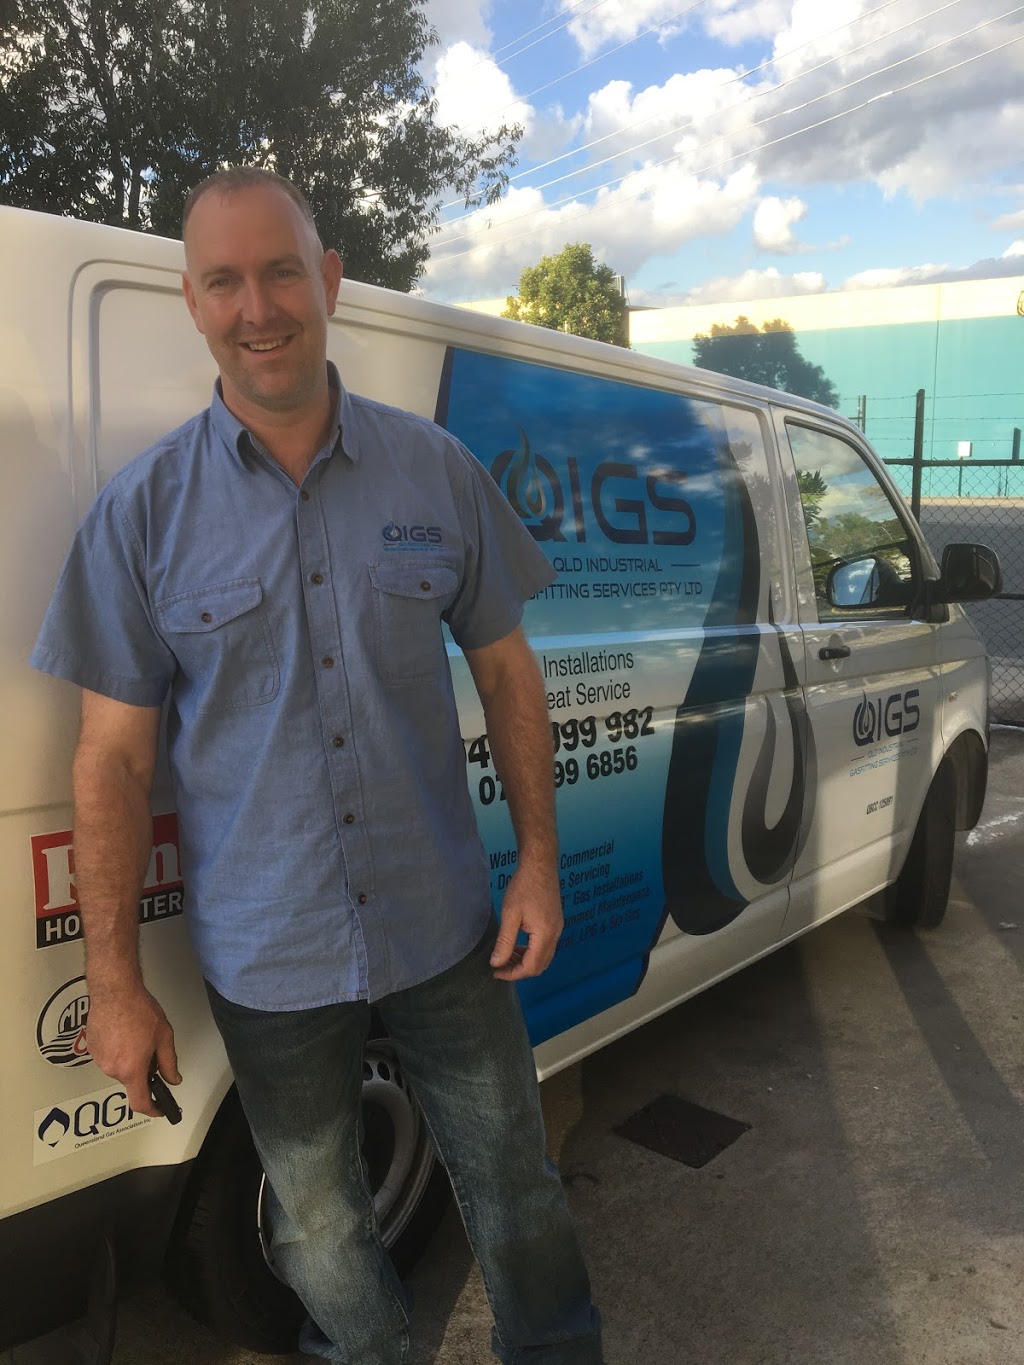 Qld Industrial Gasfitting Services Pty Ltd | plumber | Unit 2/54-58 Nealdon Dr, Meadowbrook QLD 4131, Australia | 0732996856 OR +61 7 3299 6856